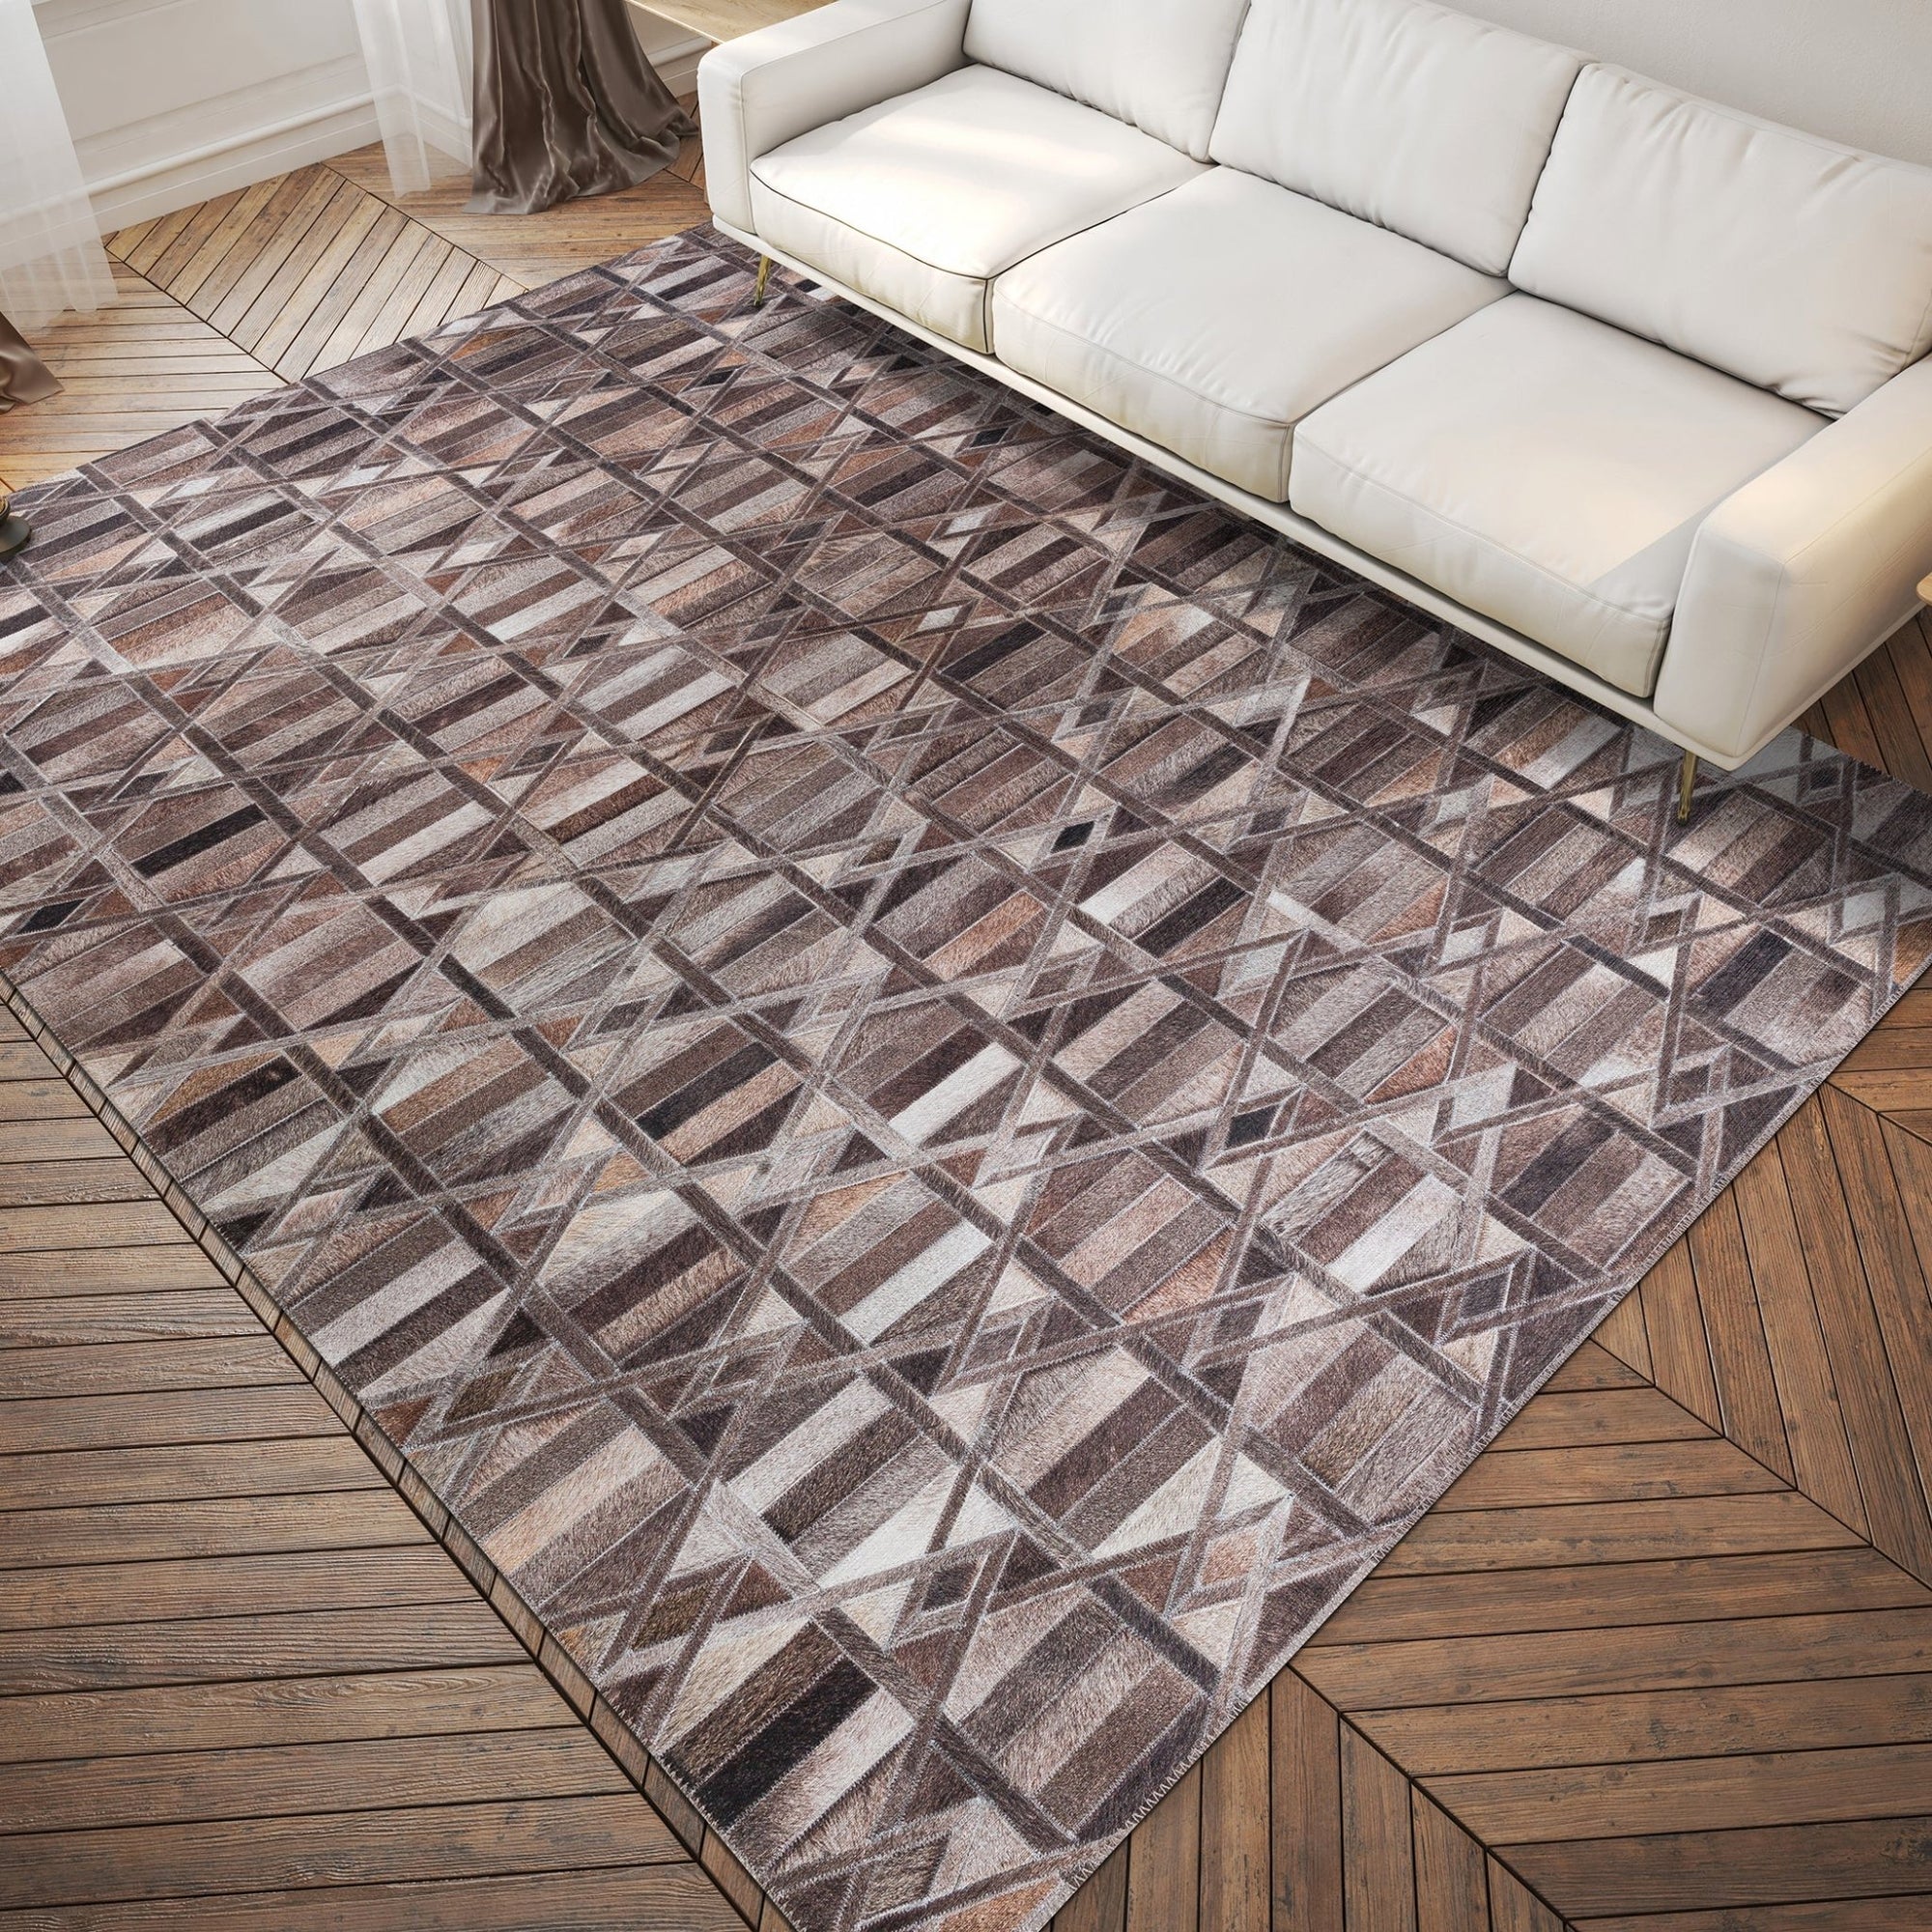 Stetson SS4 Flannel Rug - Rug & Home